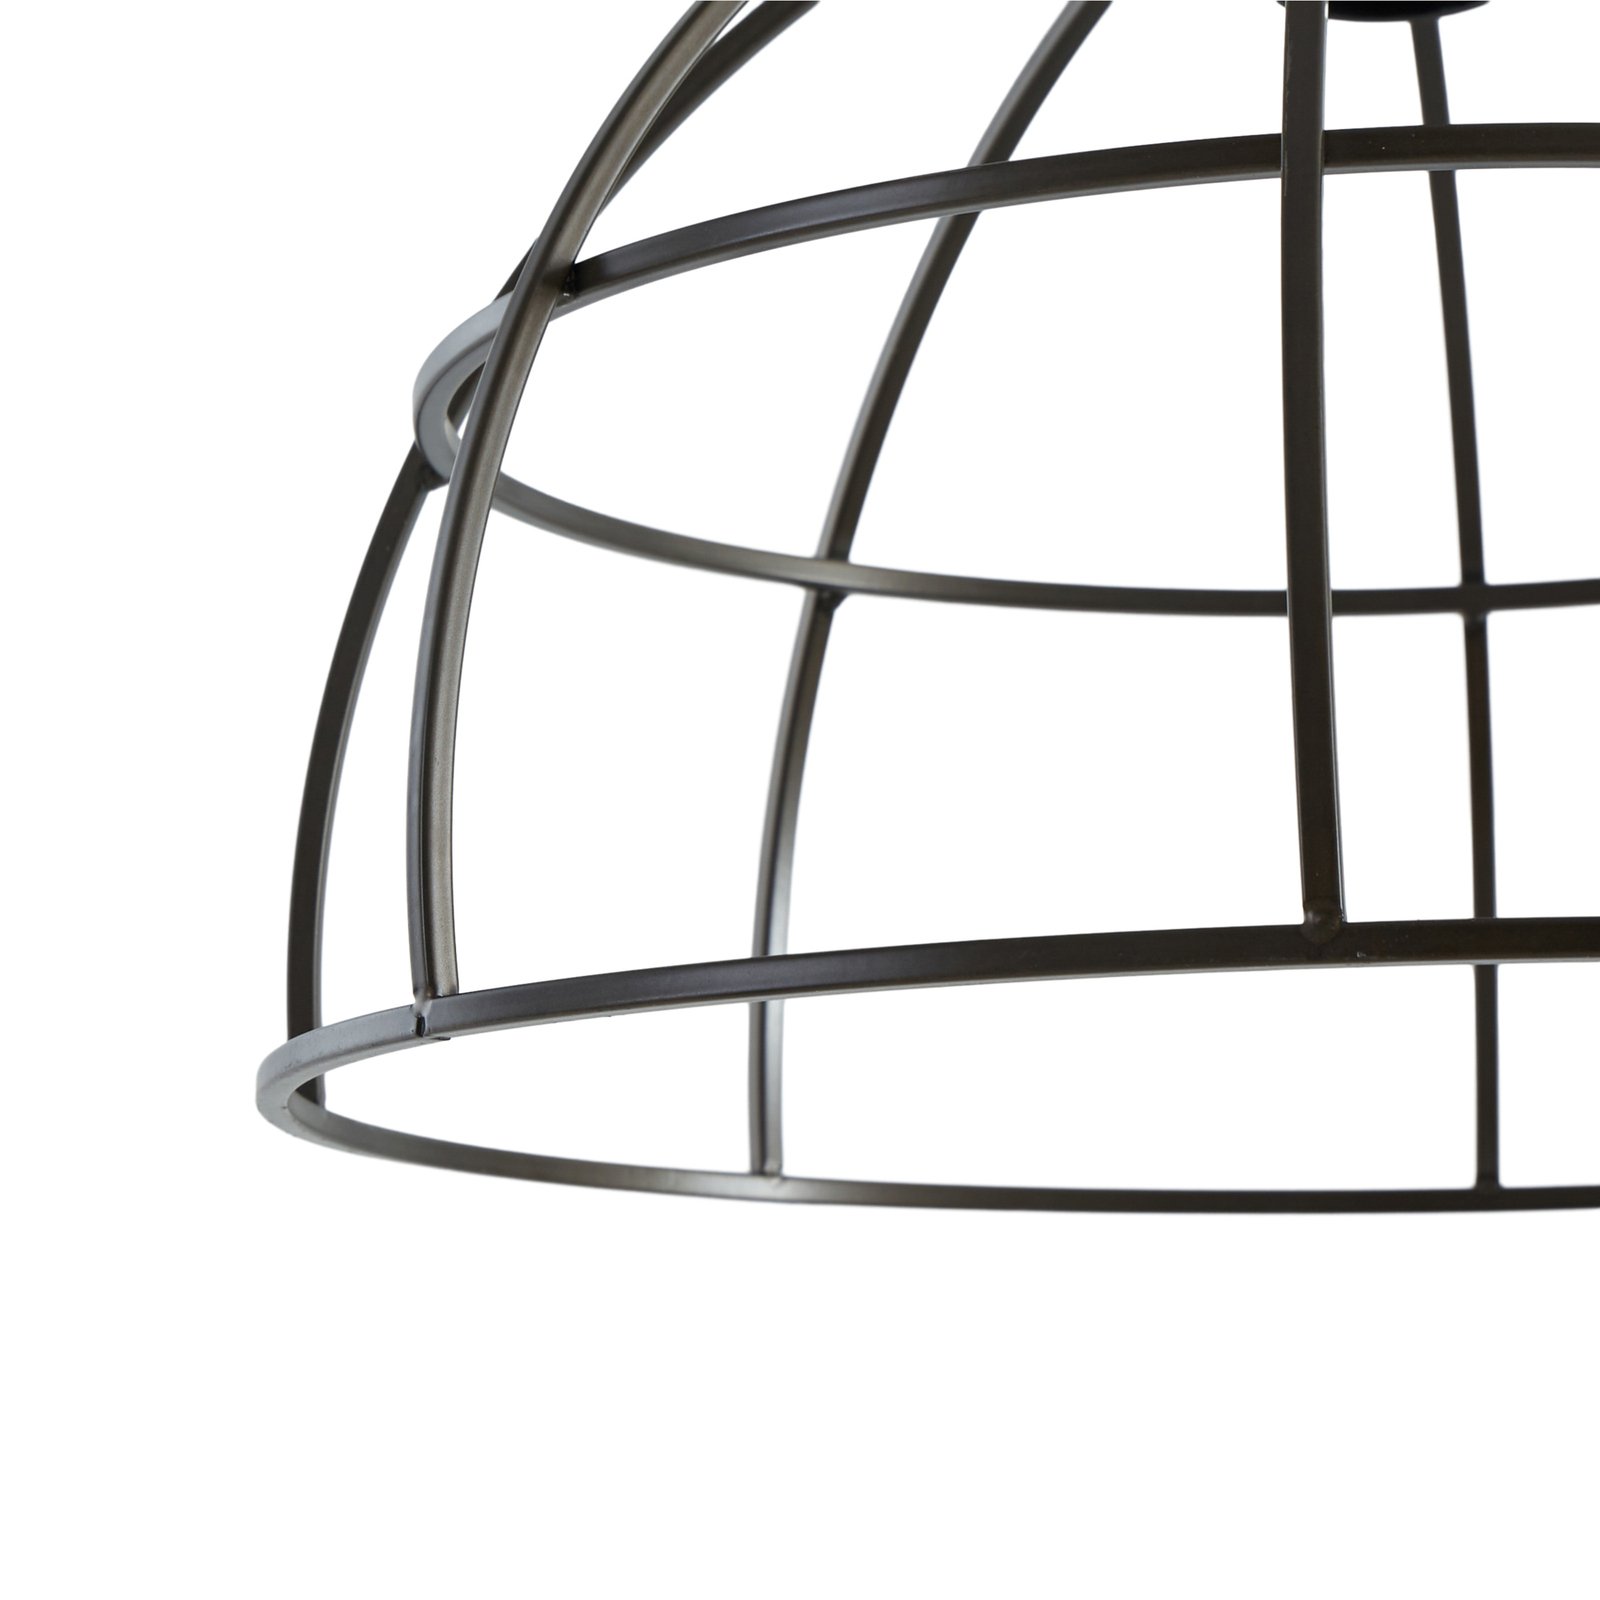 Lucande Arinthea pendant light with cage shade